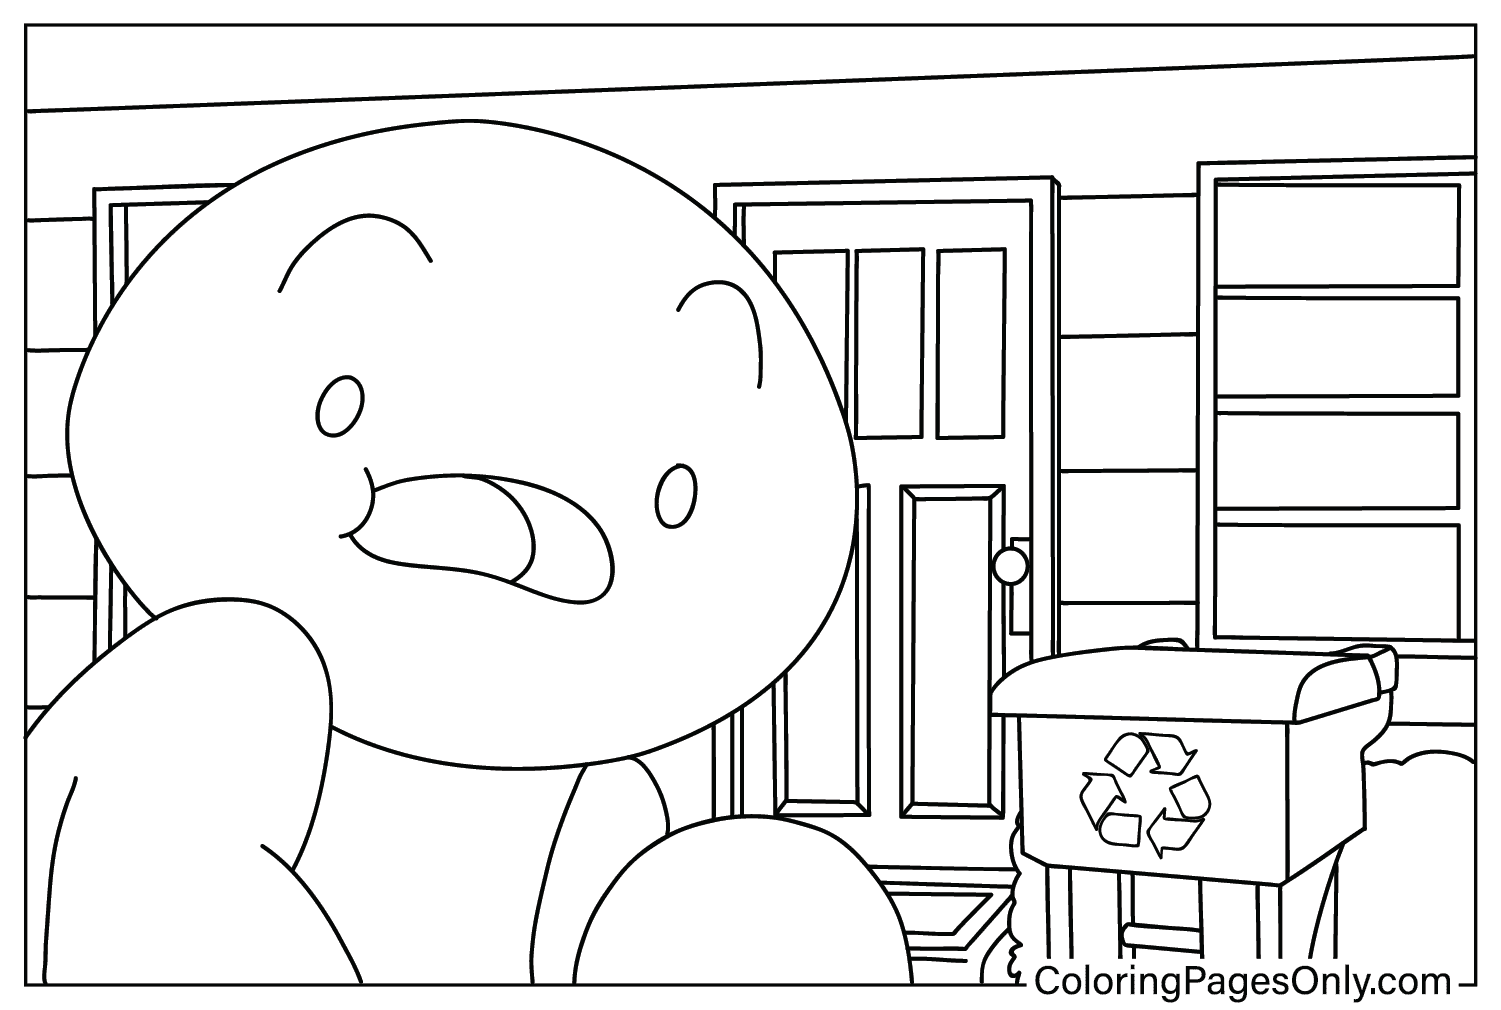 Coloring Page TheOdd1sOut from TheOdd1sOut